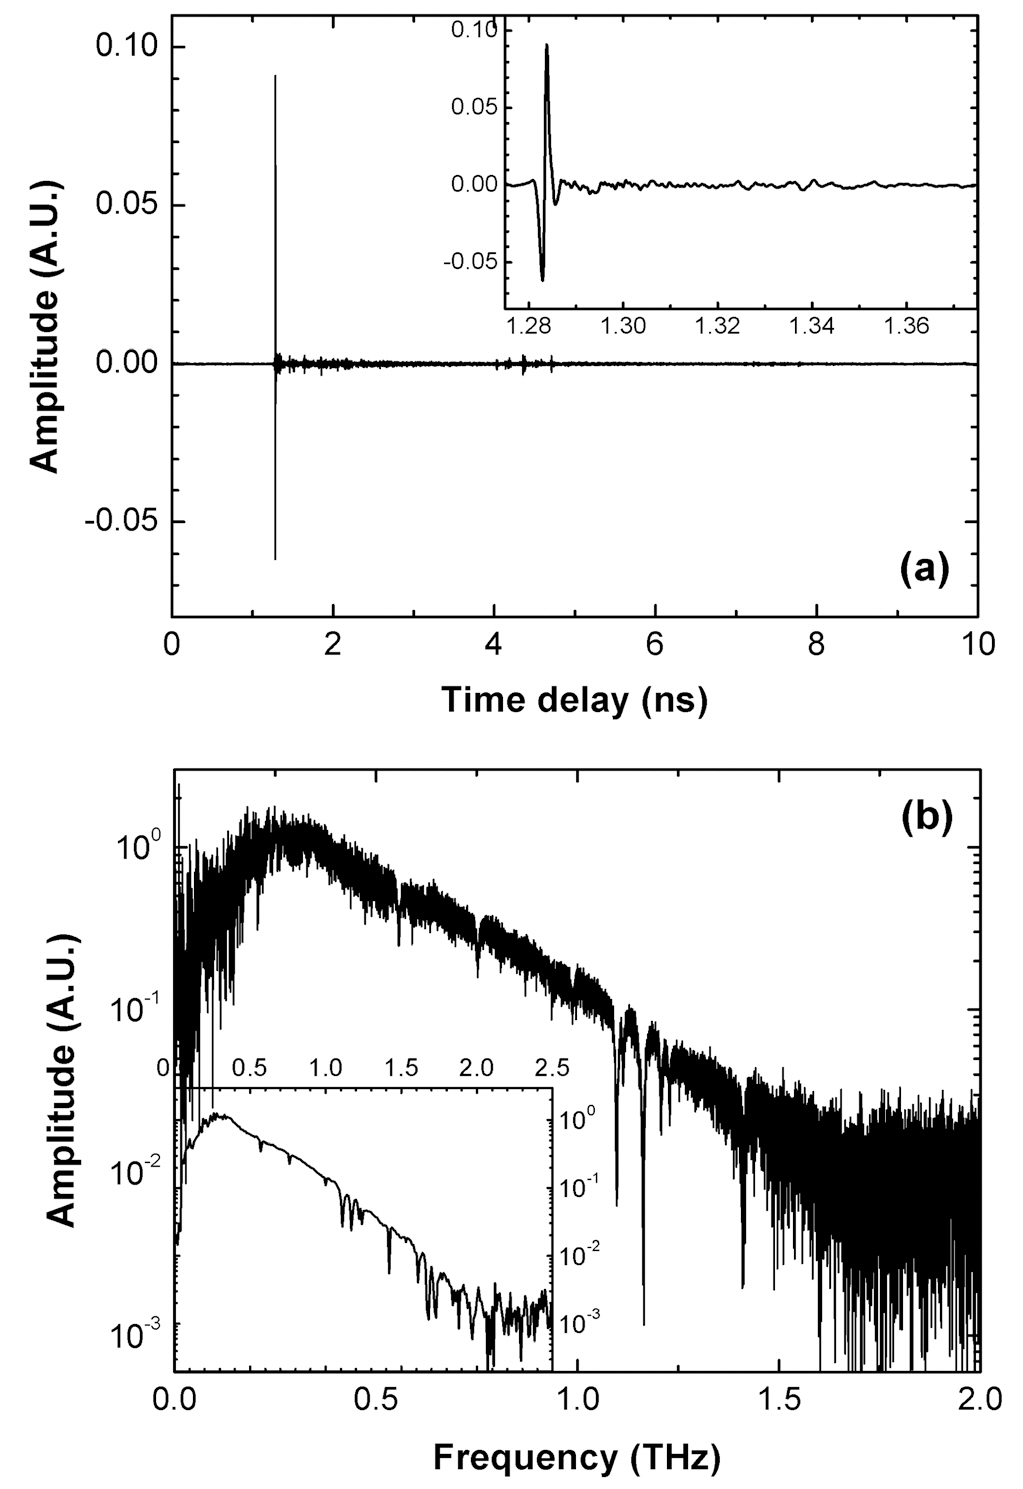 (a) Typical time-domain waveform on a 10 ns time delay window measured from ASOPS THz-TDS at relative humidity of 28%. (b) THz amplitude spectrum obtained by FFT of the time-domain waveform in (a).